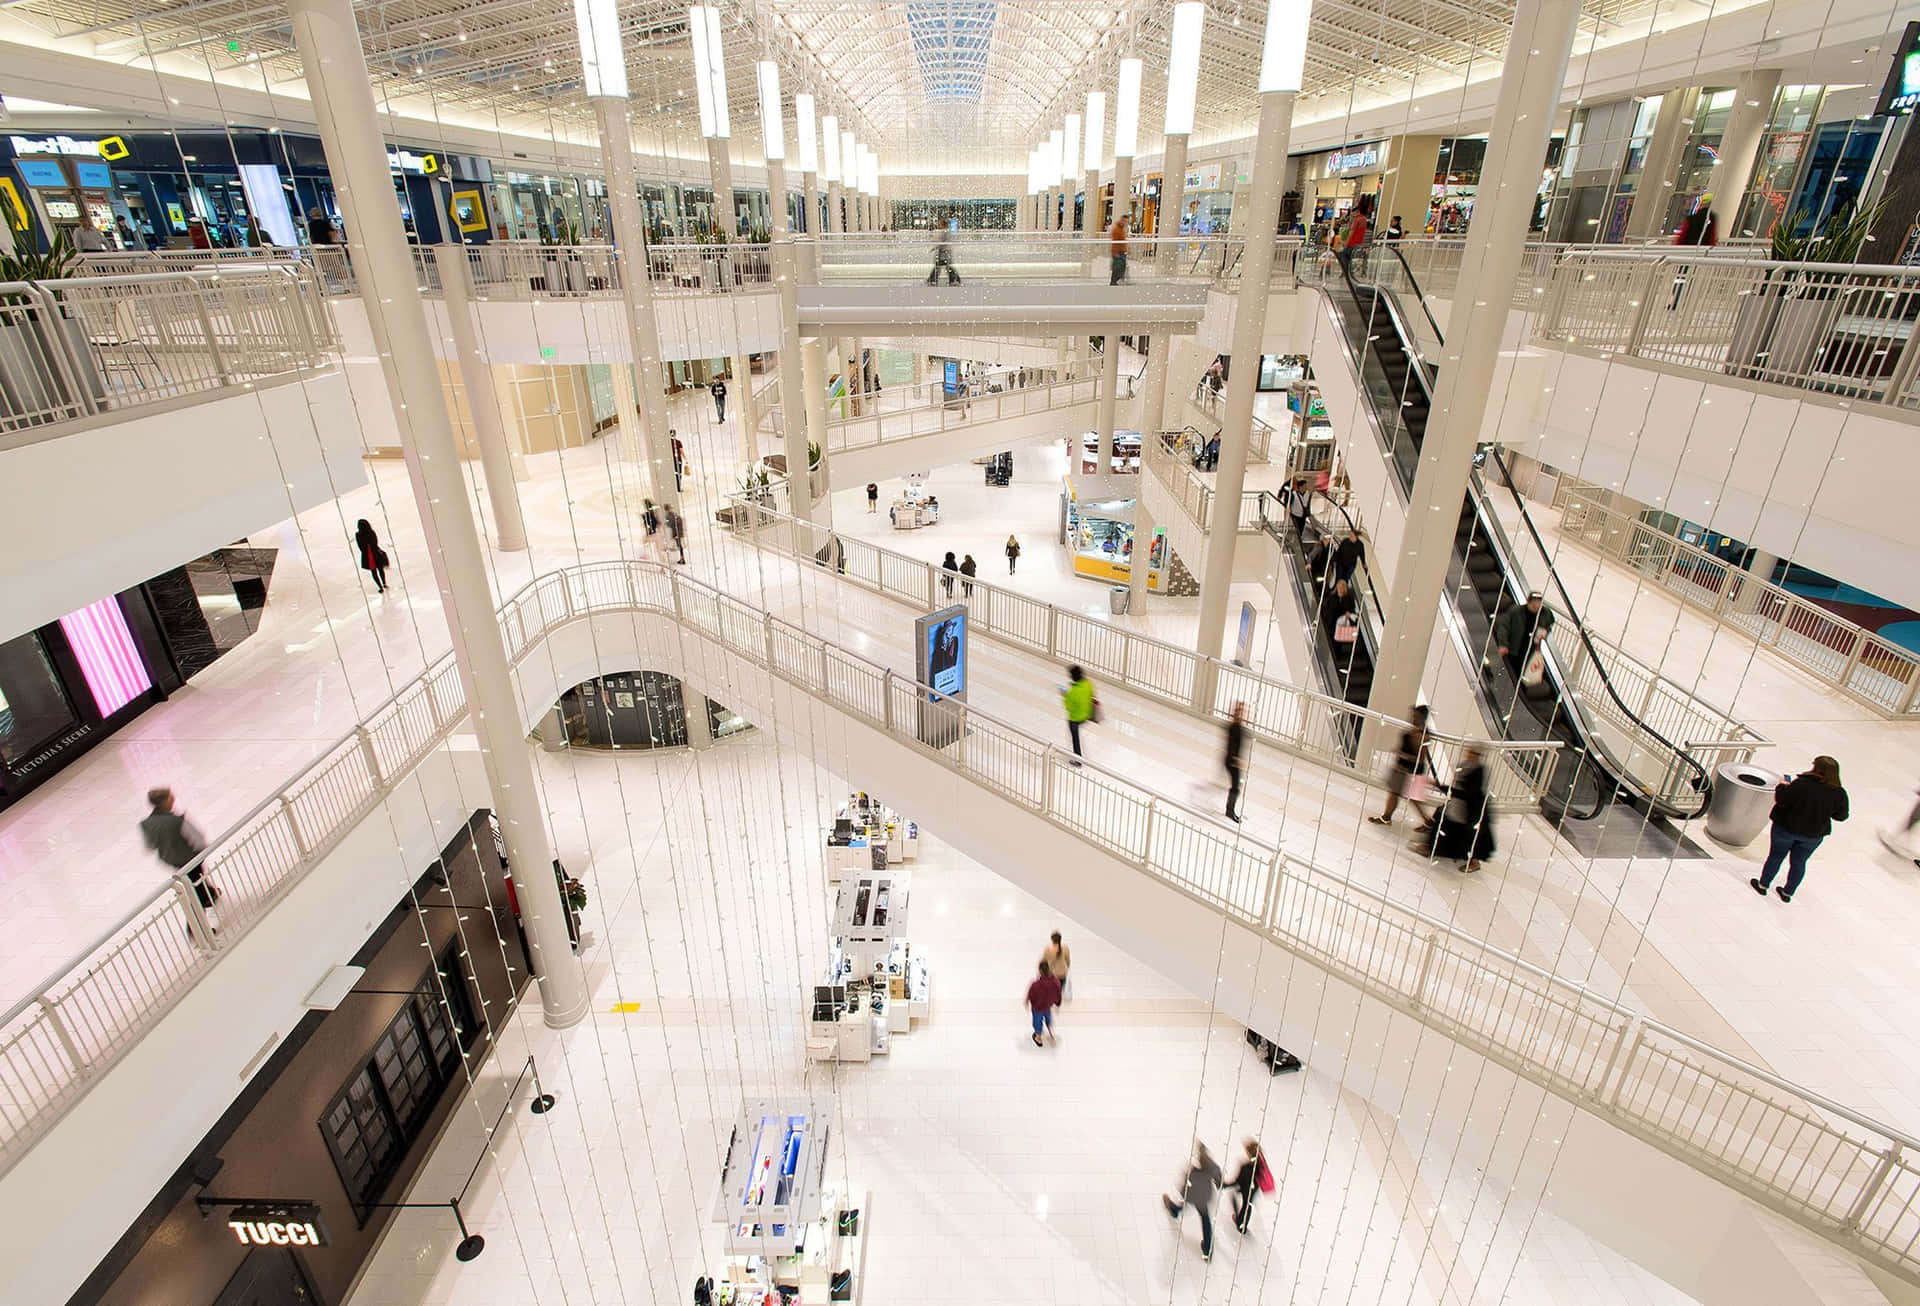 A Large Mall With People Walking Around